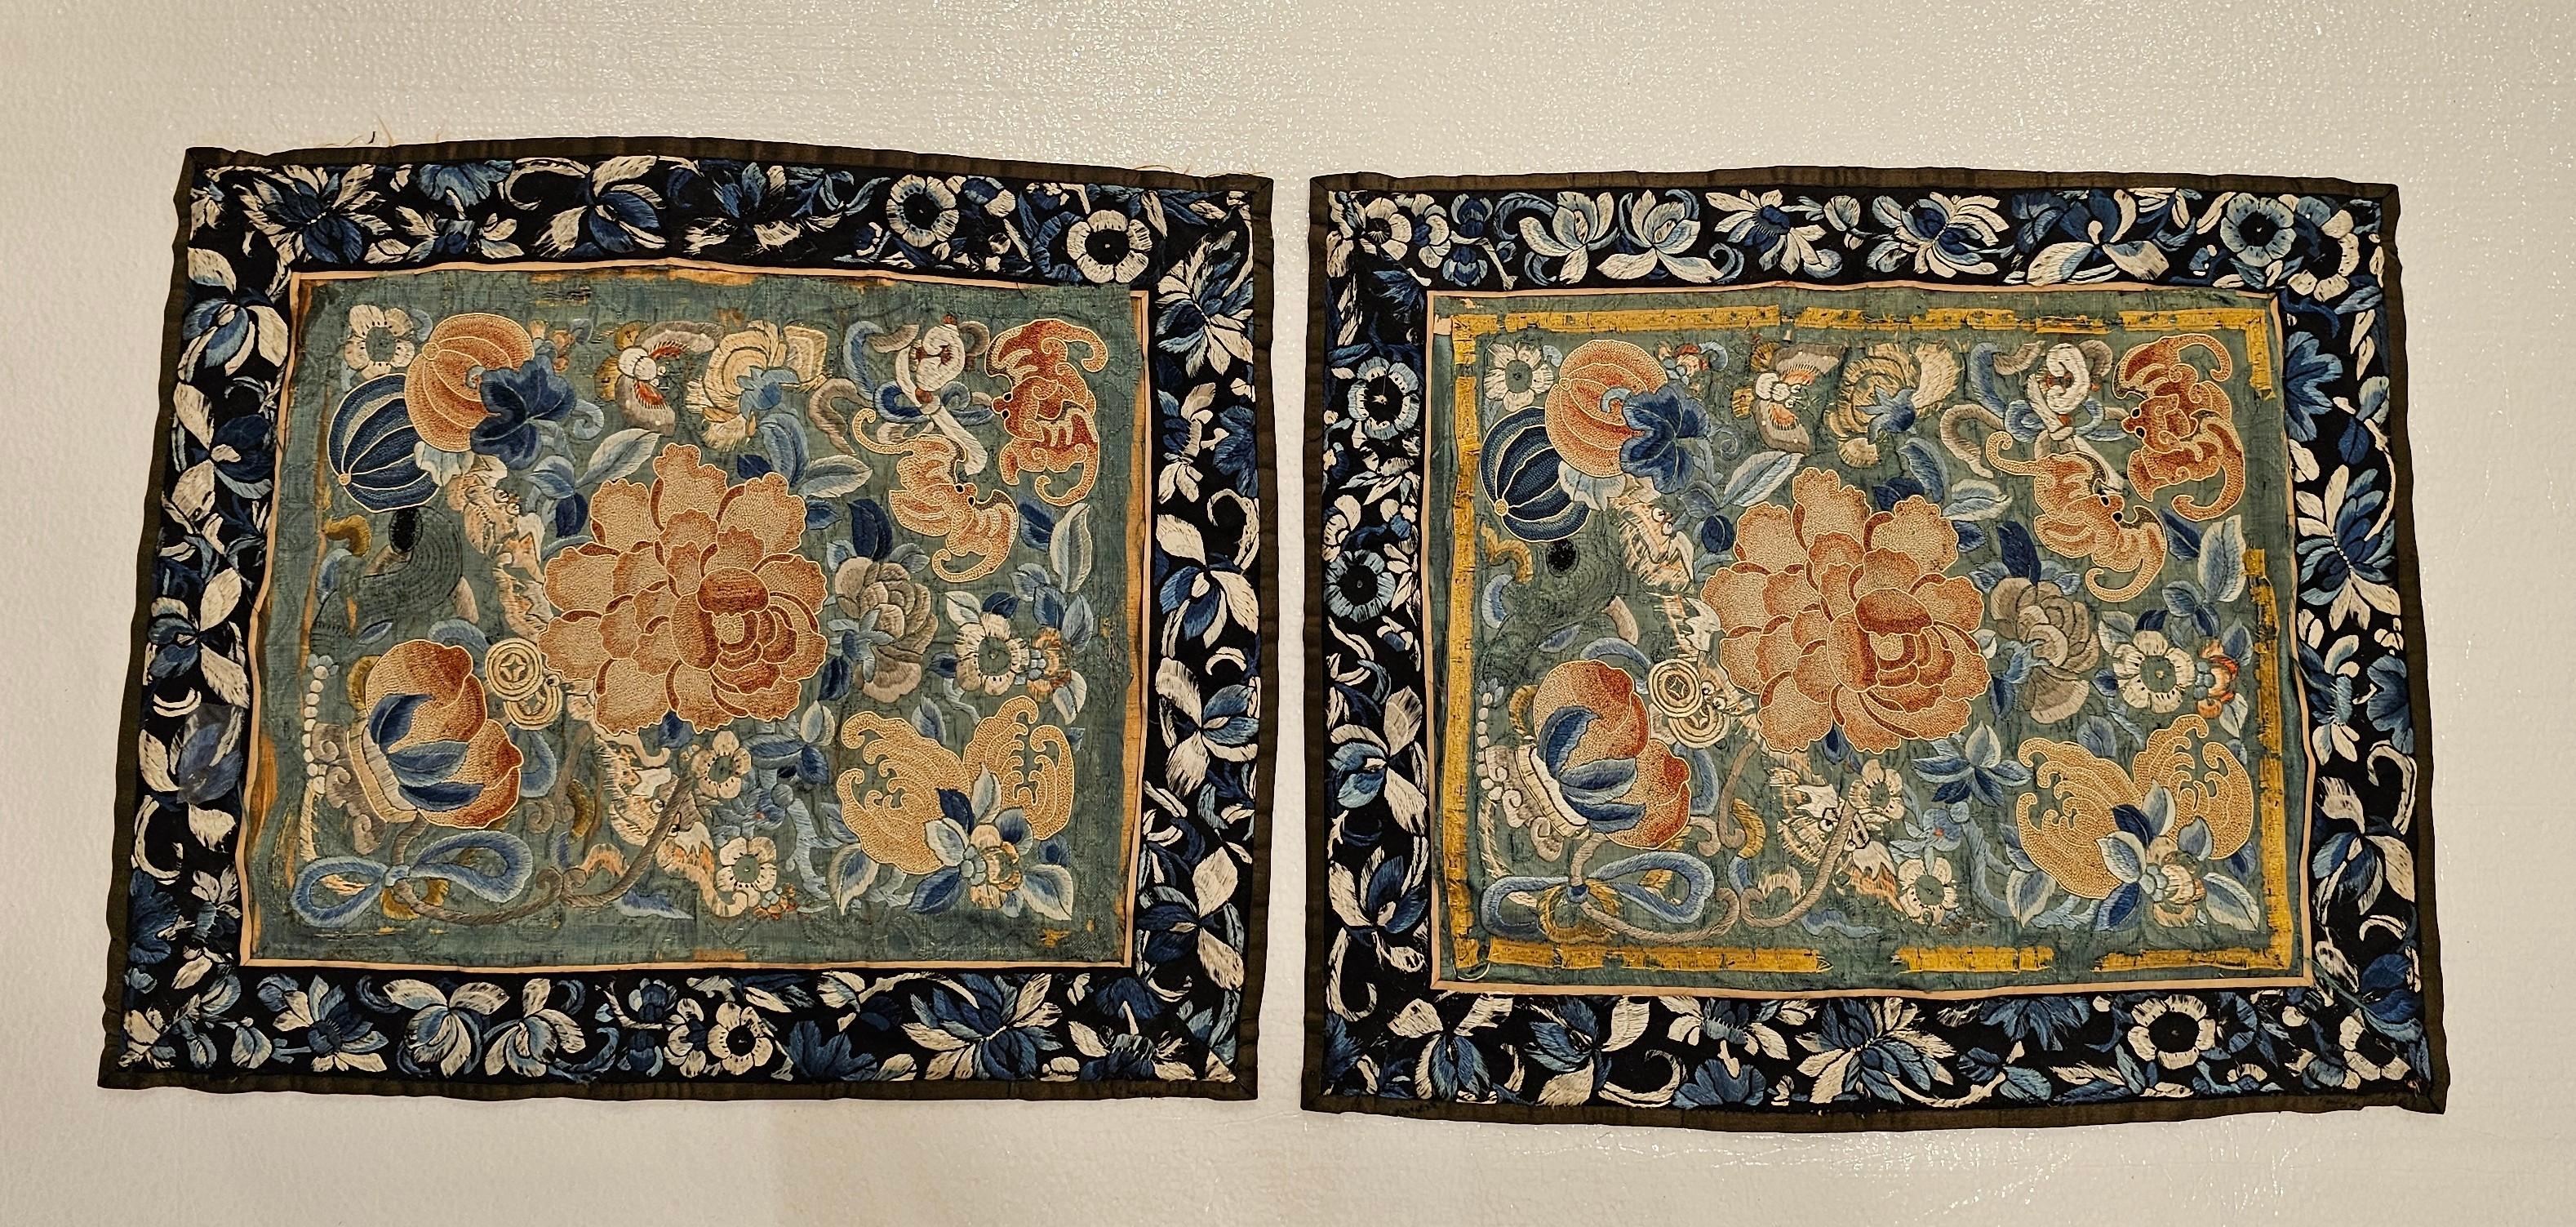 Beautiful pair of 19th Century Chinese embroidery panels.  Each panel has extremely fine hand embroidery of flowers, bats, and moths on a green silk background,  Each Panel has a wonderful embroidered order in blue and ivory.  The panels are in